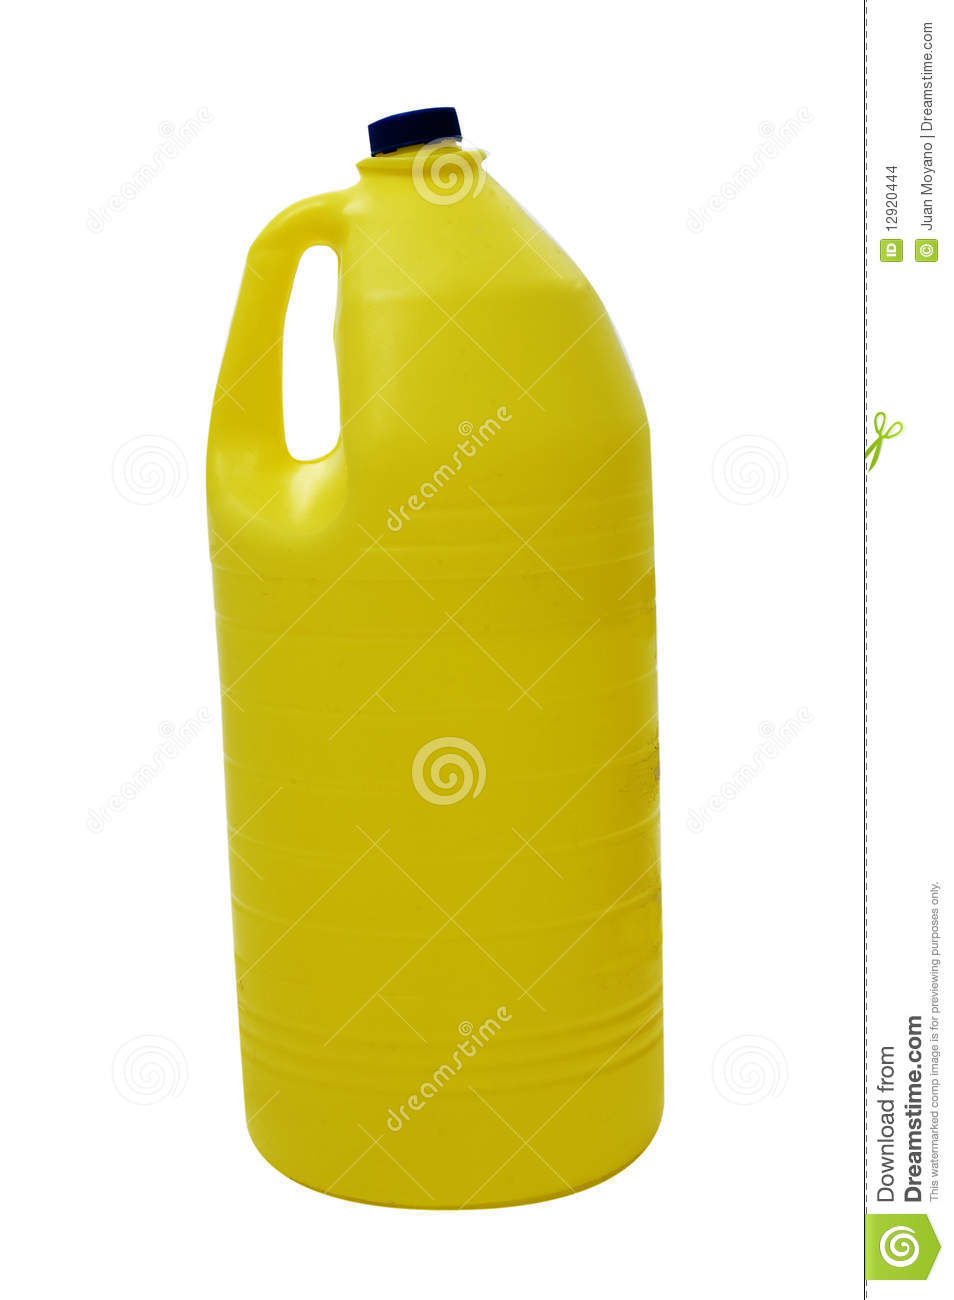 Bottle Of Bleach Isolated On A White Background